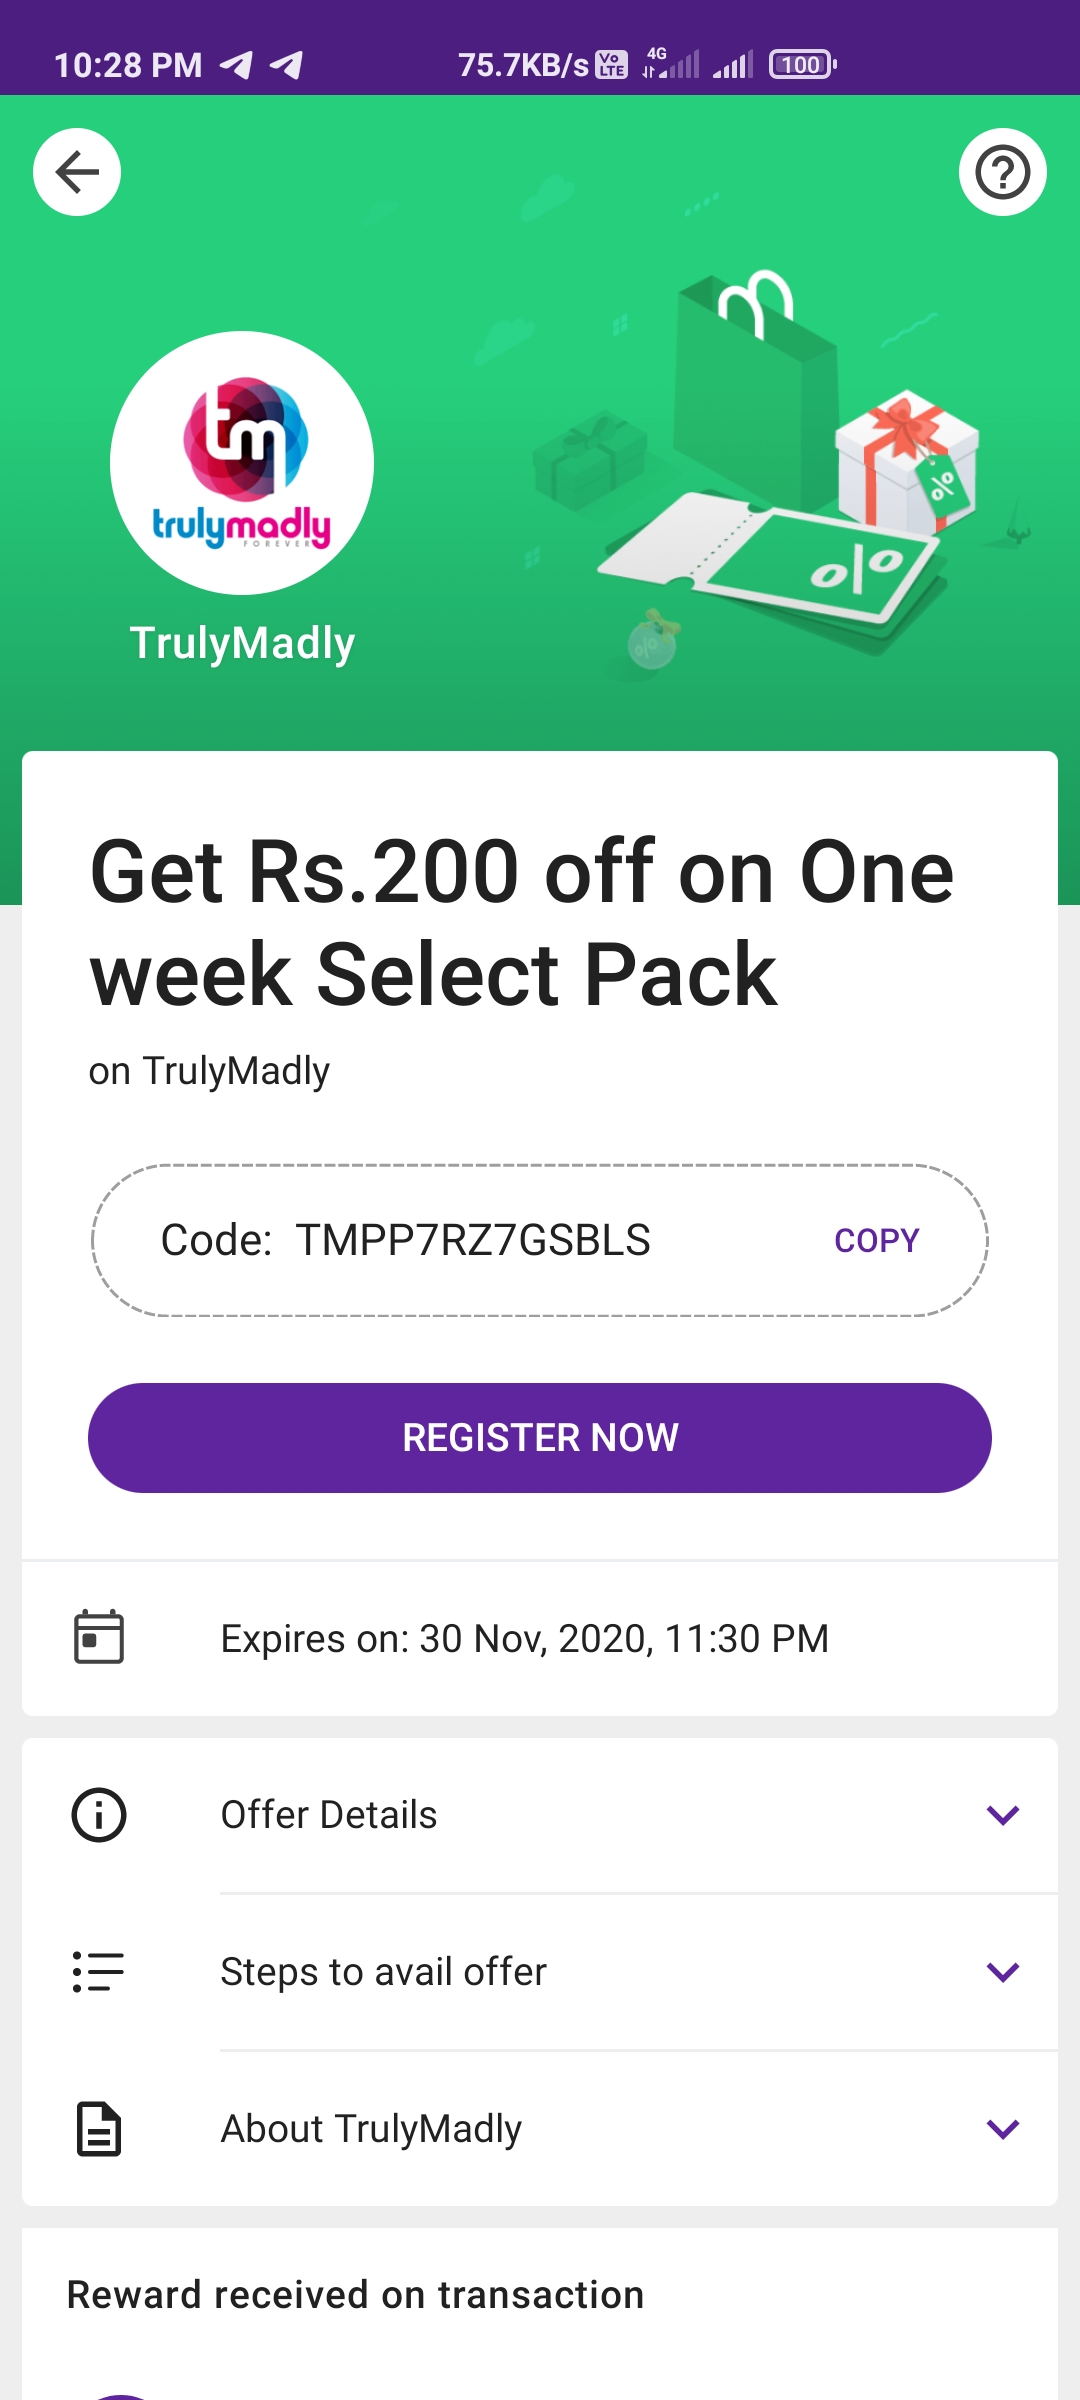 Trulymadly Free Select Pack Voucher By Phonepe Offer